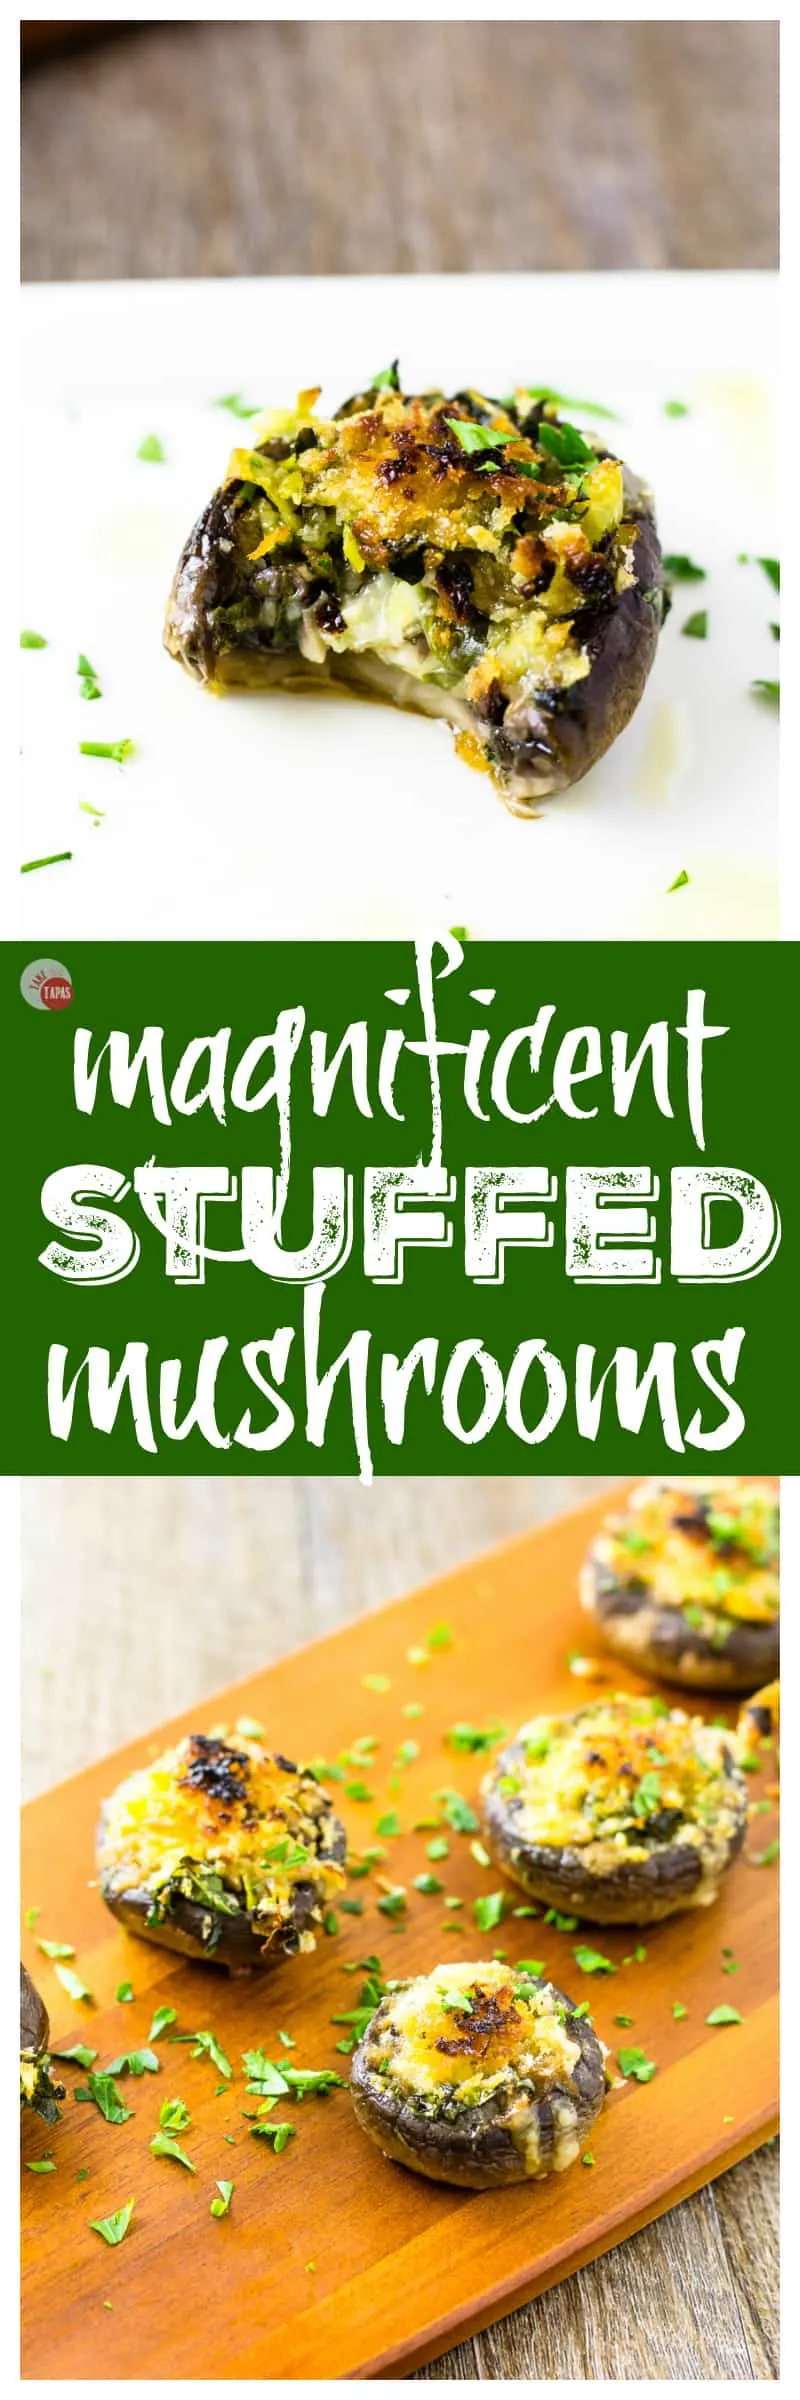 mushrooms on a plate with text overlay for pinterest